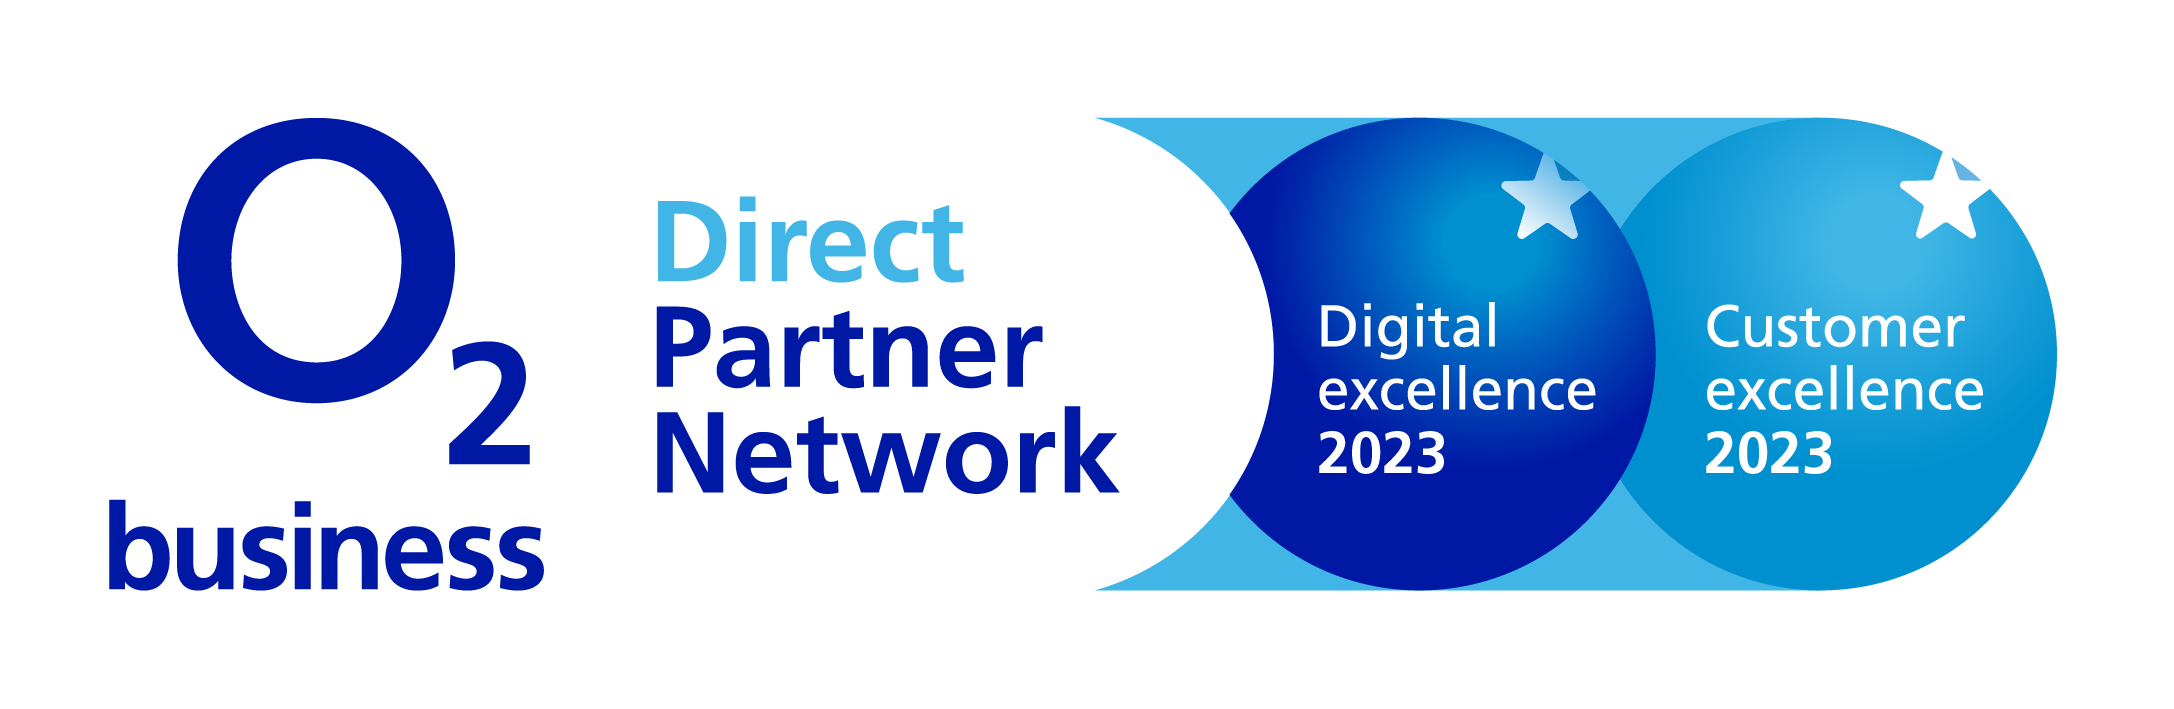 Digital and Customer Excellence Award 2022